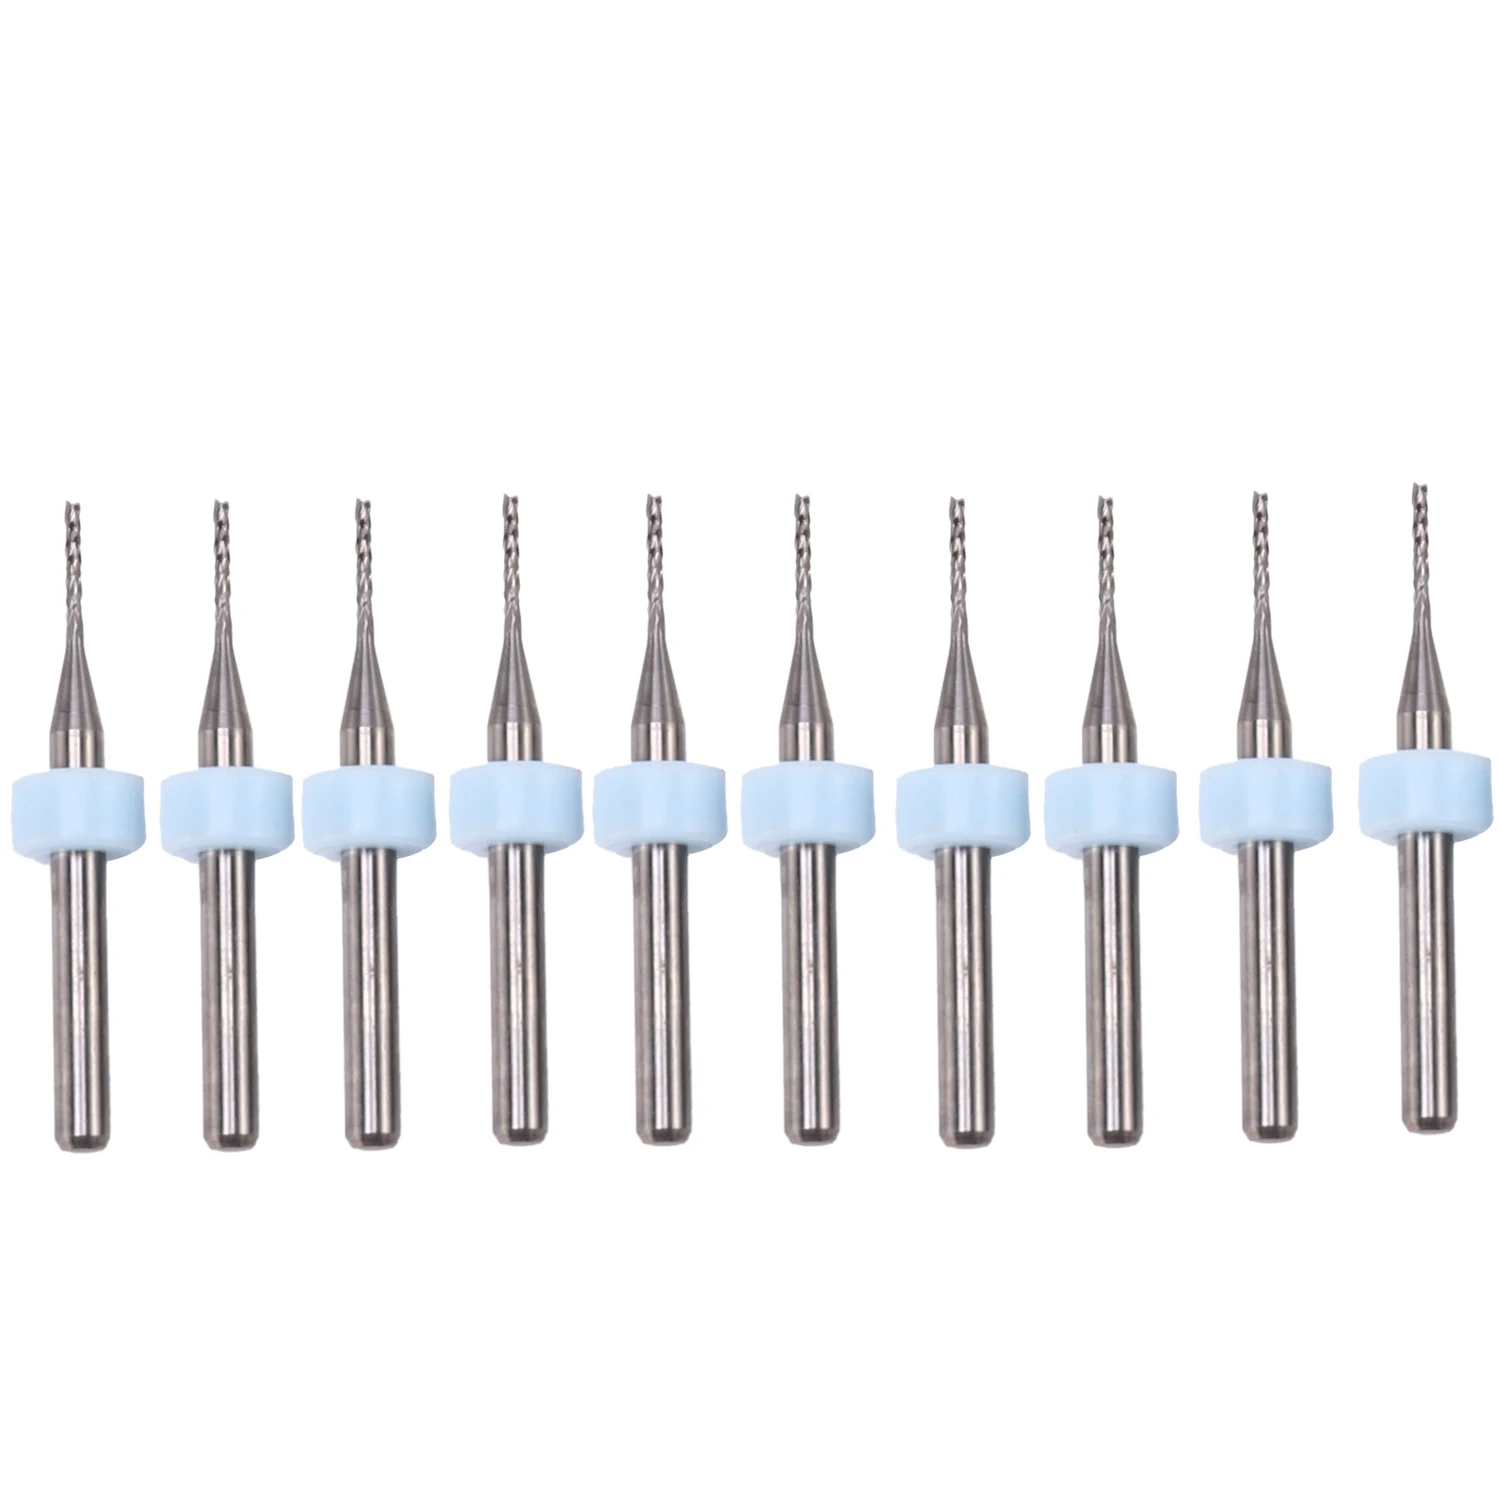 

10Pcs Pcb Milling Cutter 1Mm Fish Tail Milling Cutter Corn Milling Cutter Tungsten Carbide Mini End Mill Engraving Cnc